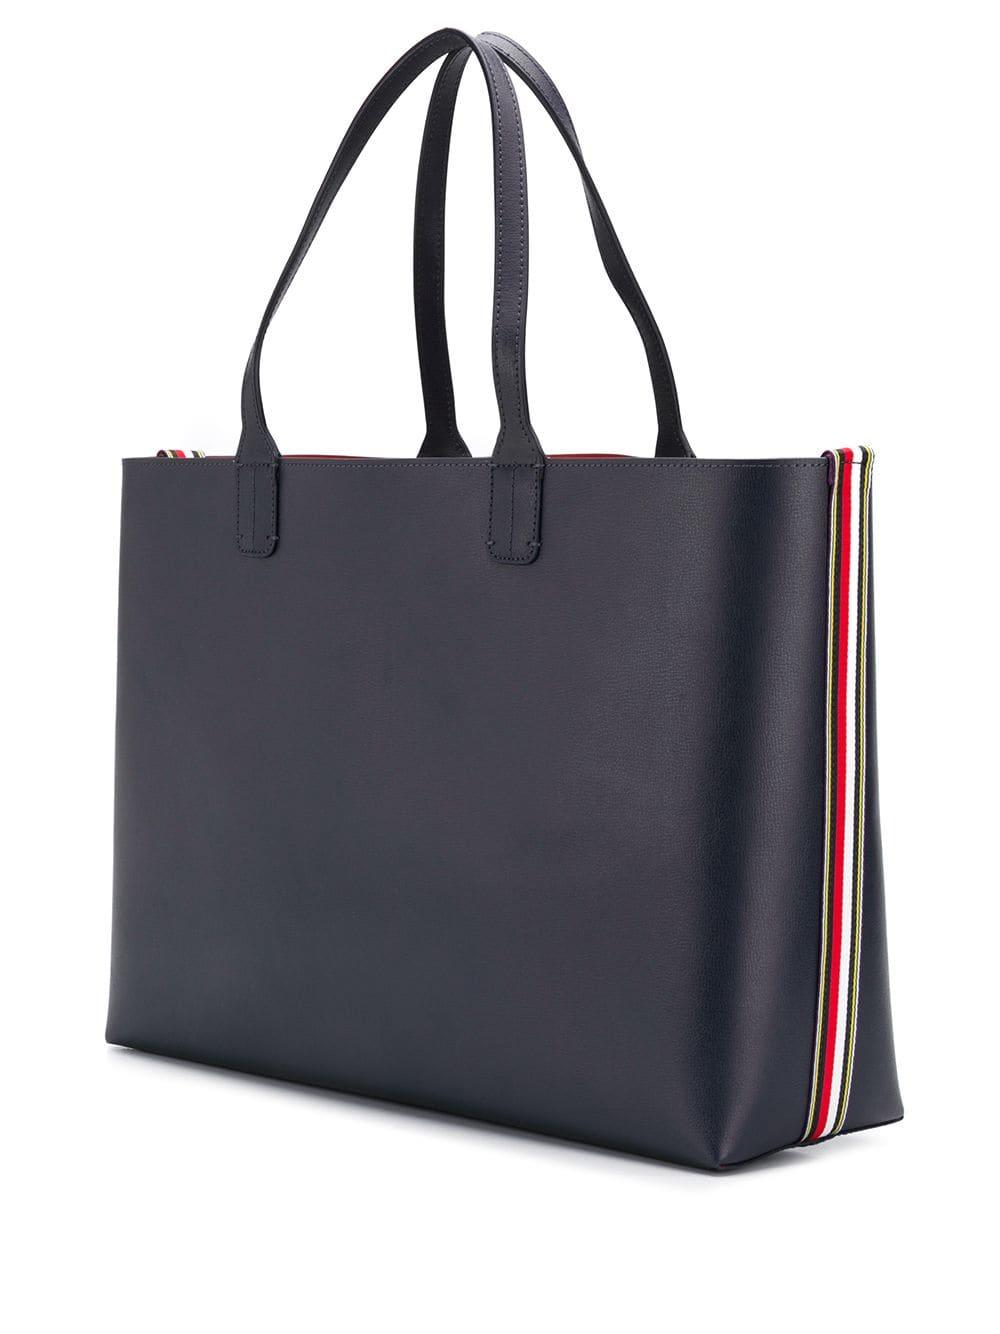 Tommy Hilfiger Leather Striped Tote Bag in Blue - Lyst